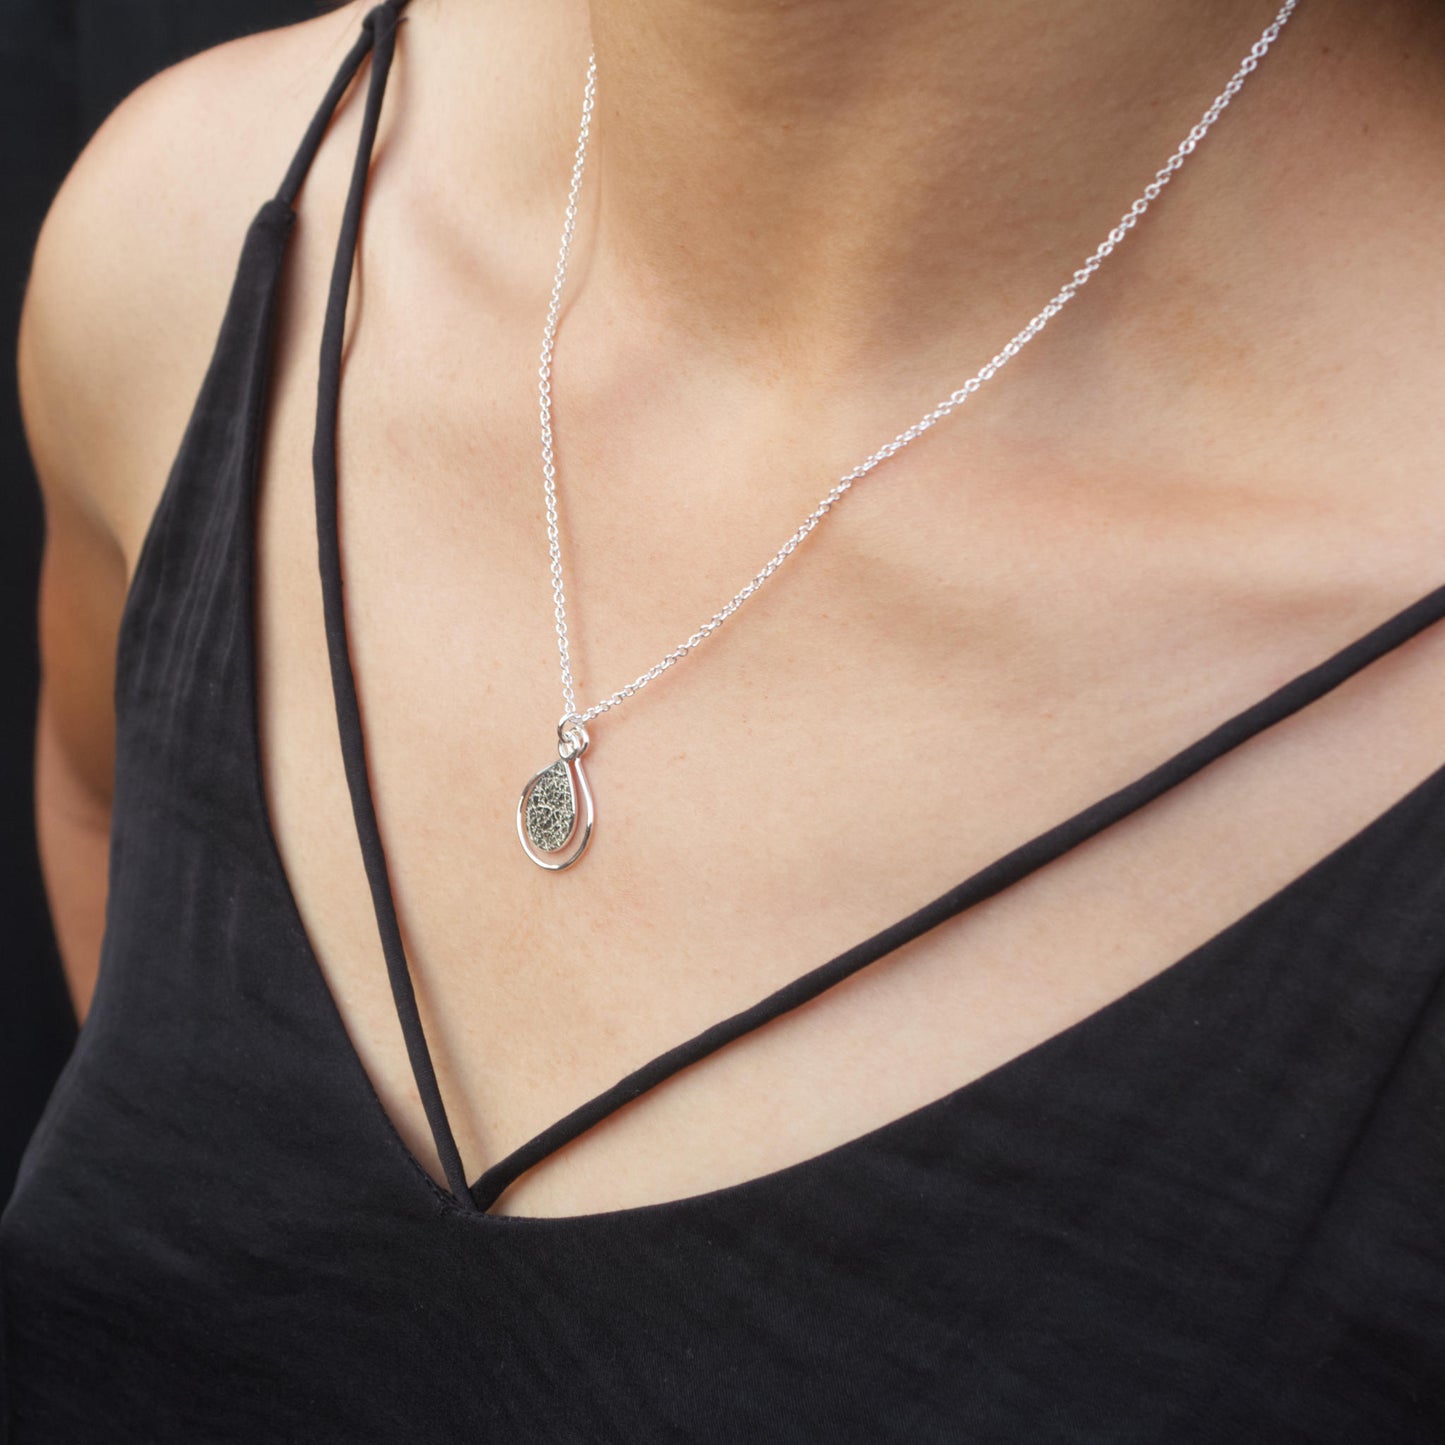 model wearing handmade sterling silver textured dewdrop necklace